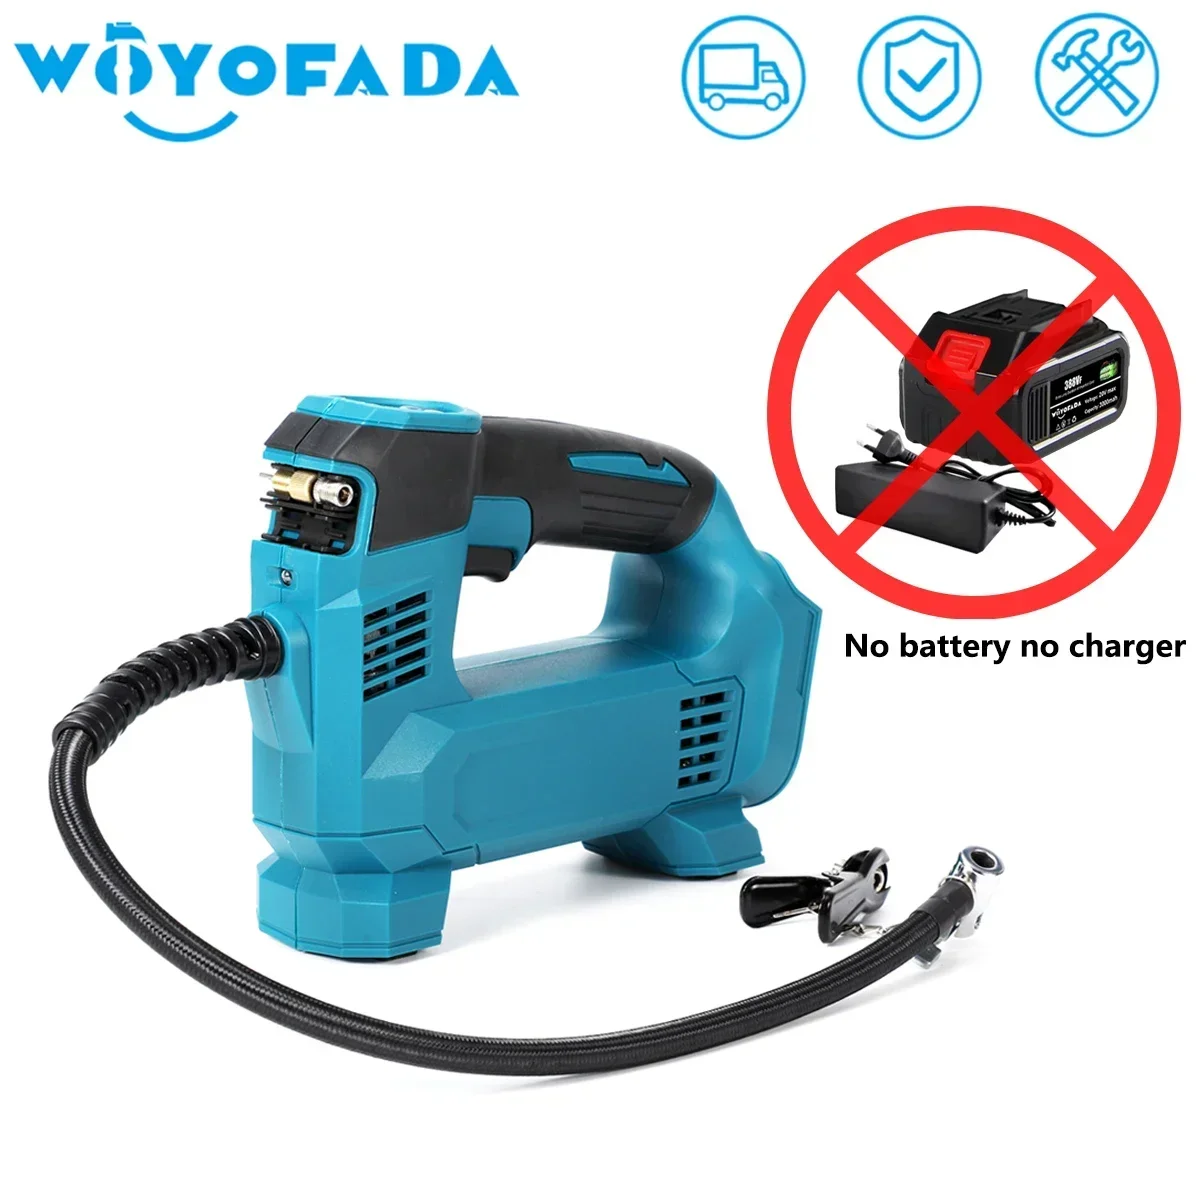 WOYOFADA Cordless Portable Electric Air Pump Car Tire Inflator Air Compressor For Car Bicycle Tires Balls For Makita 18V Battery 150psi car air pump cordless handheld air compressor portable electric tire inflator with led light auto off function for car motorcycle bicycle tires balls